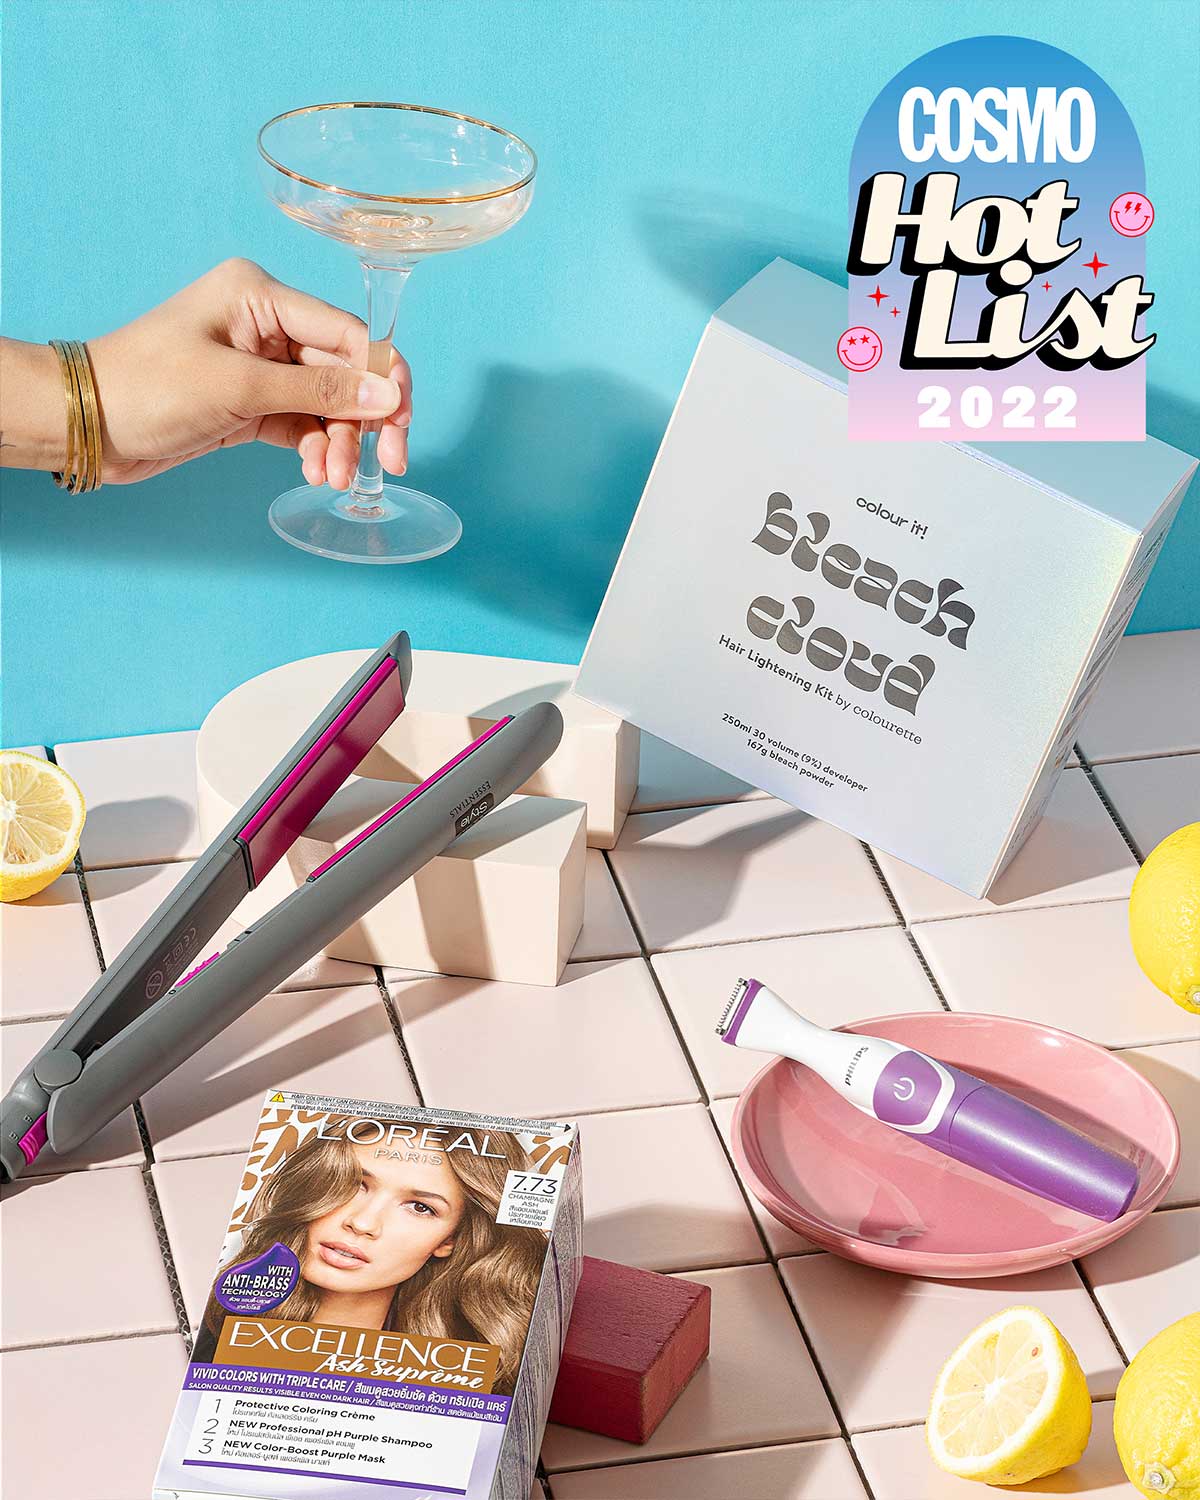 cosmo ph hot list 2022 - best DIY beauty products